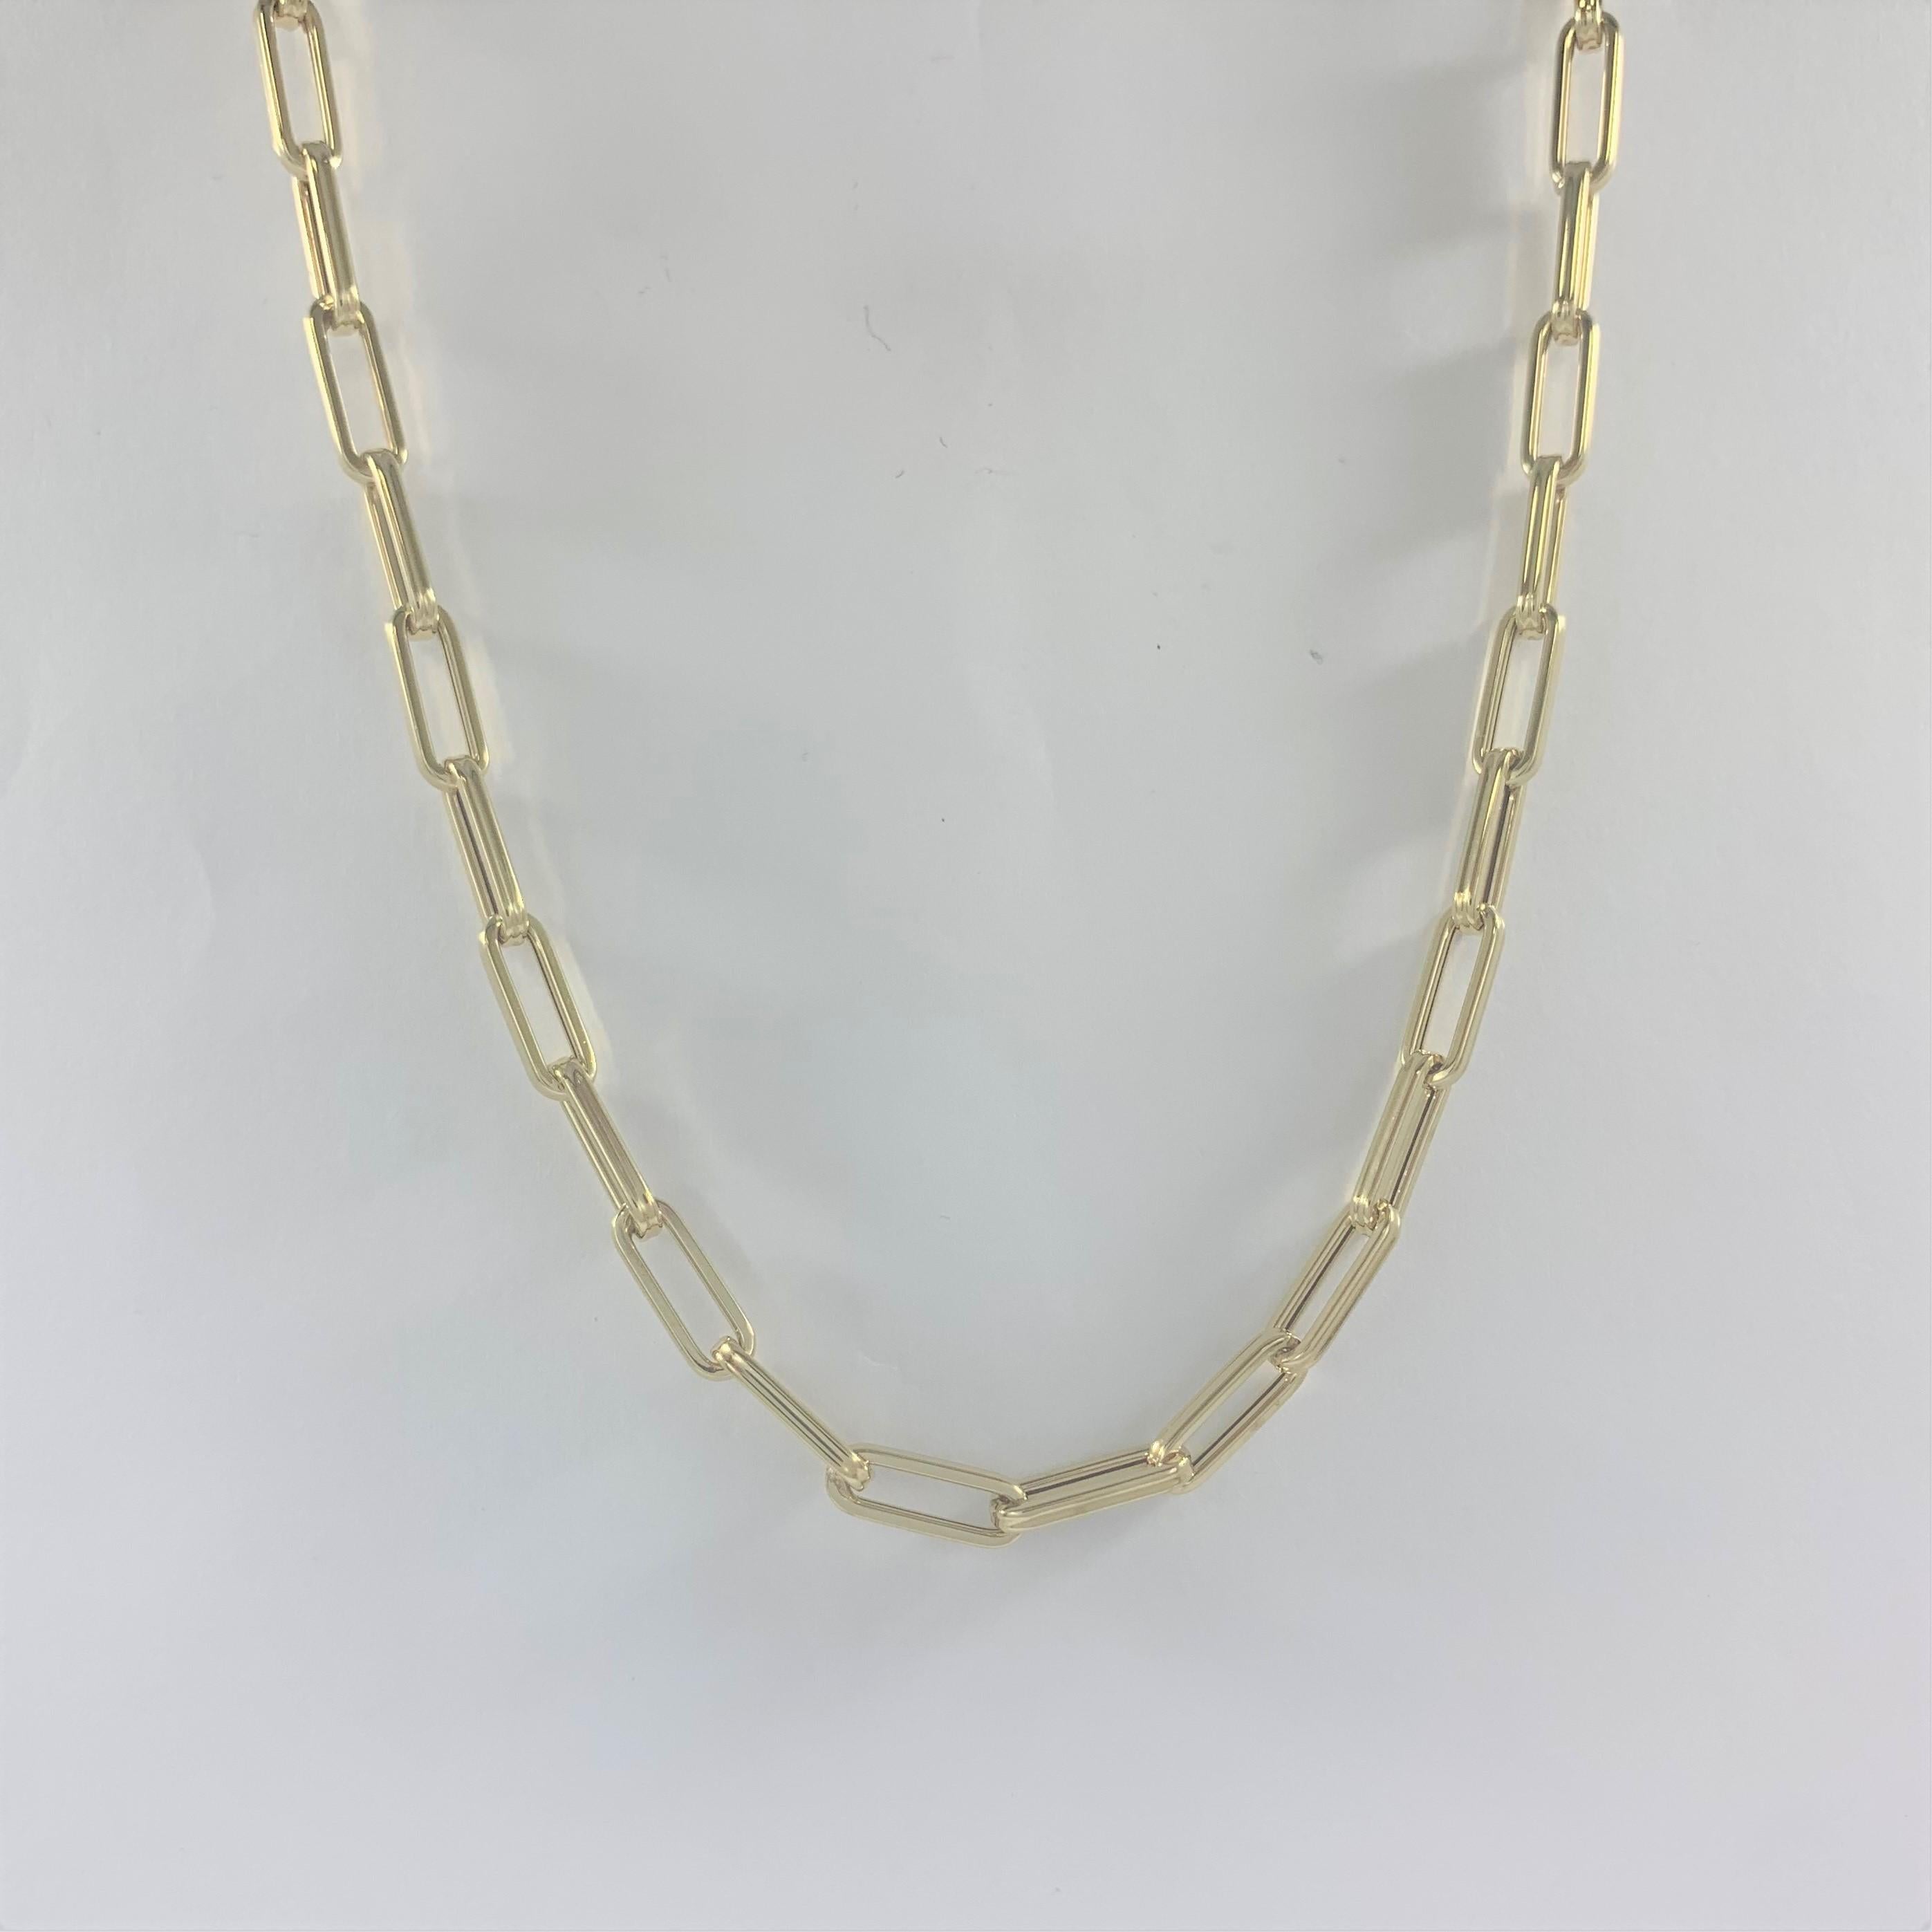 Women's 14 Karat Yellow Gold Paperclip Link Chain Necklace, Made in Italy